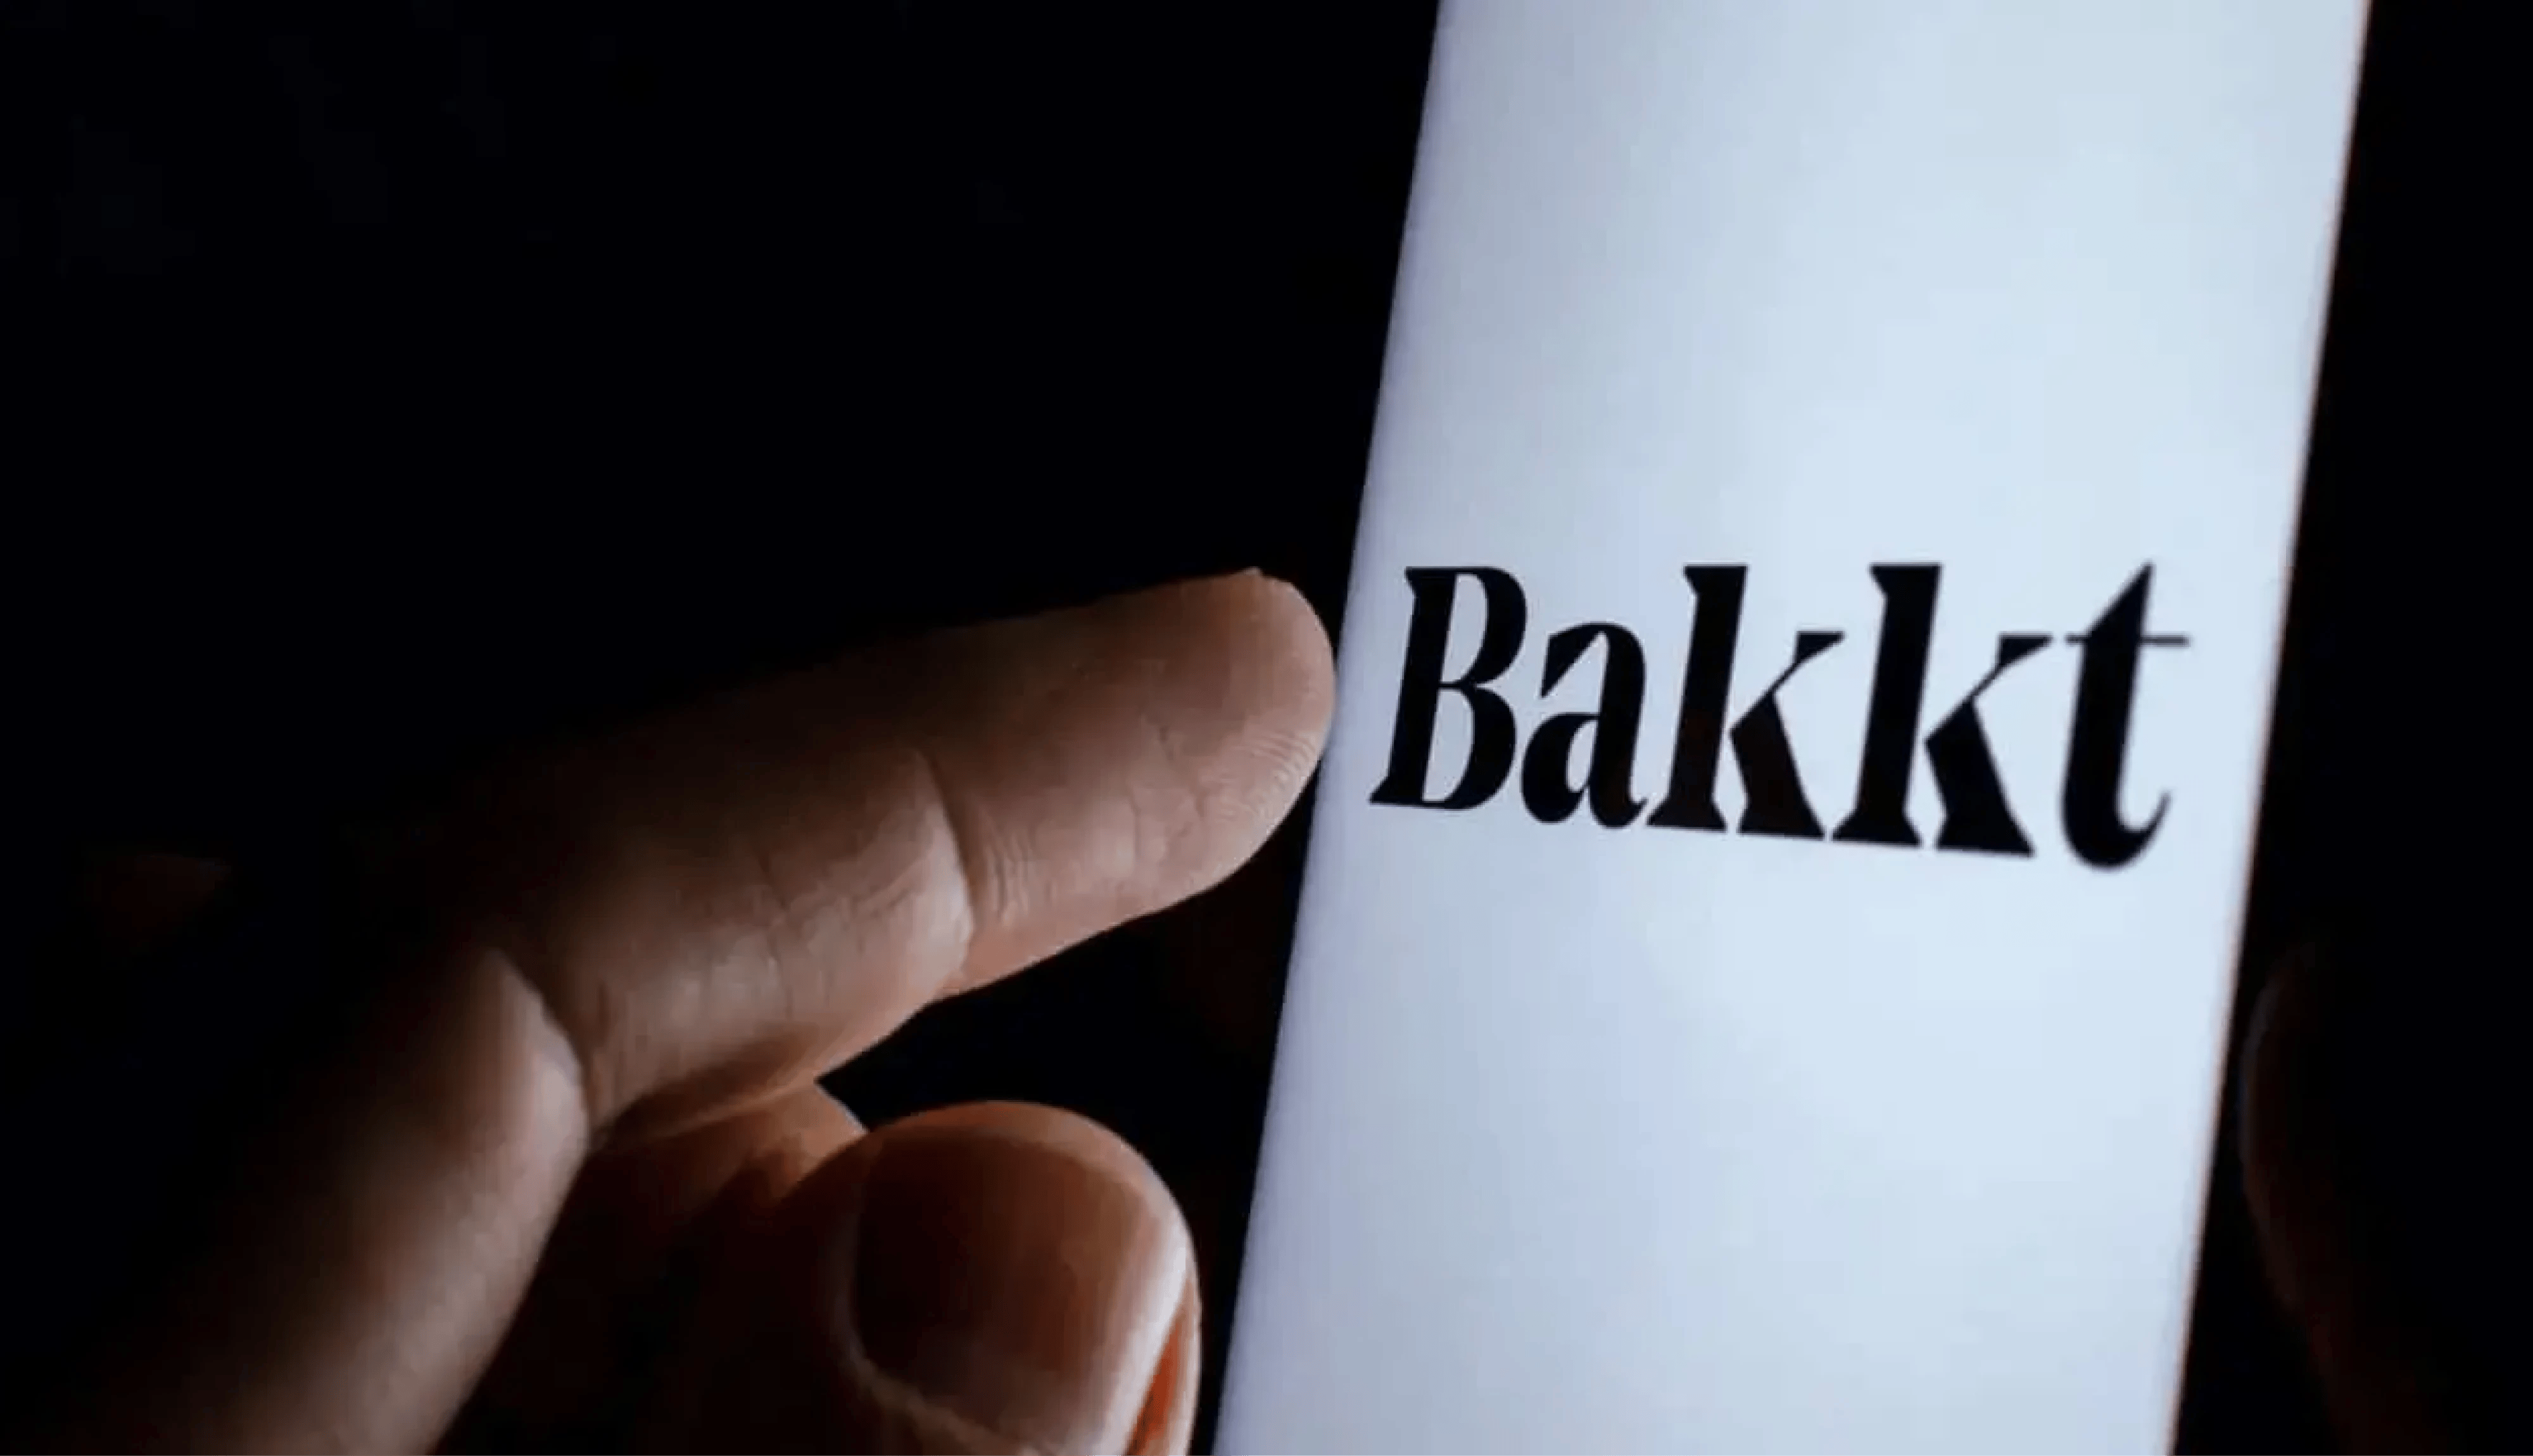 Bakkt Faces Uncertainty Over Future Operations